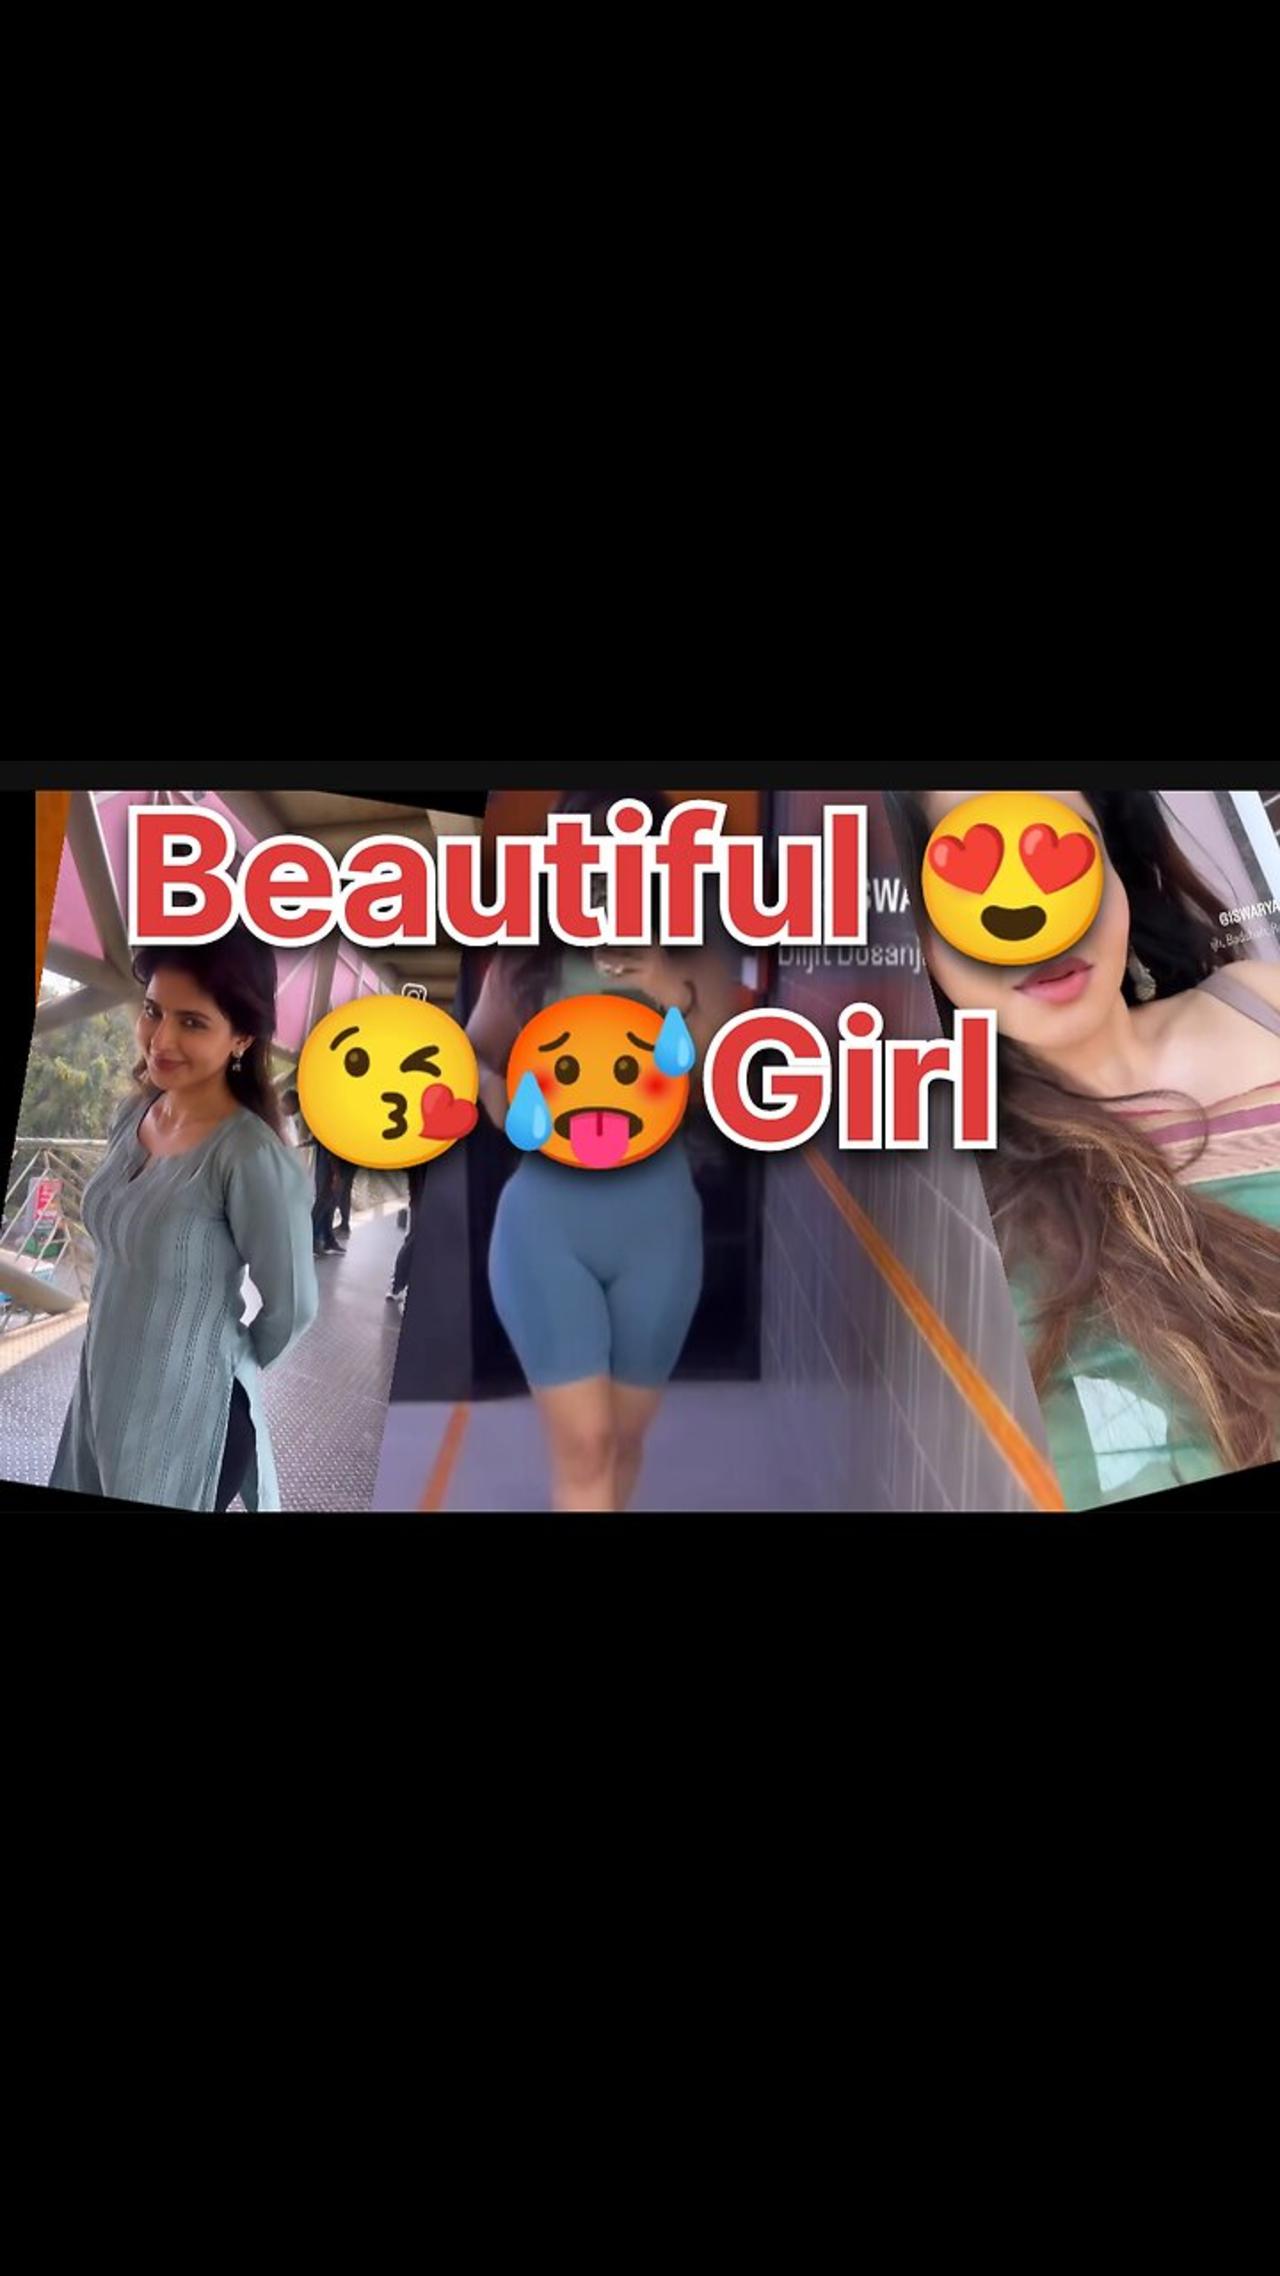 beautiful hot 🥵😘girl video | hot girl on both shorts and dress 🥻 👙 | hot videos| her cleavage🥵